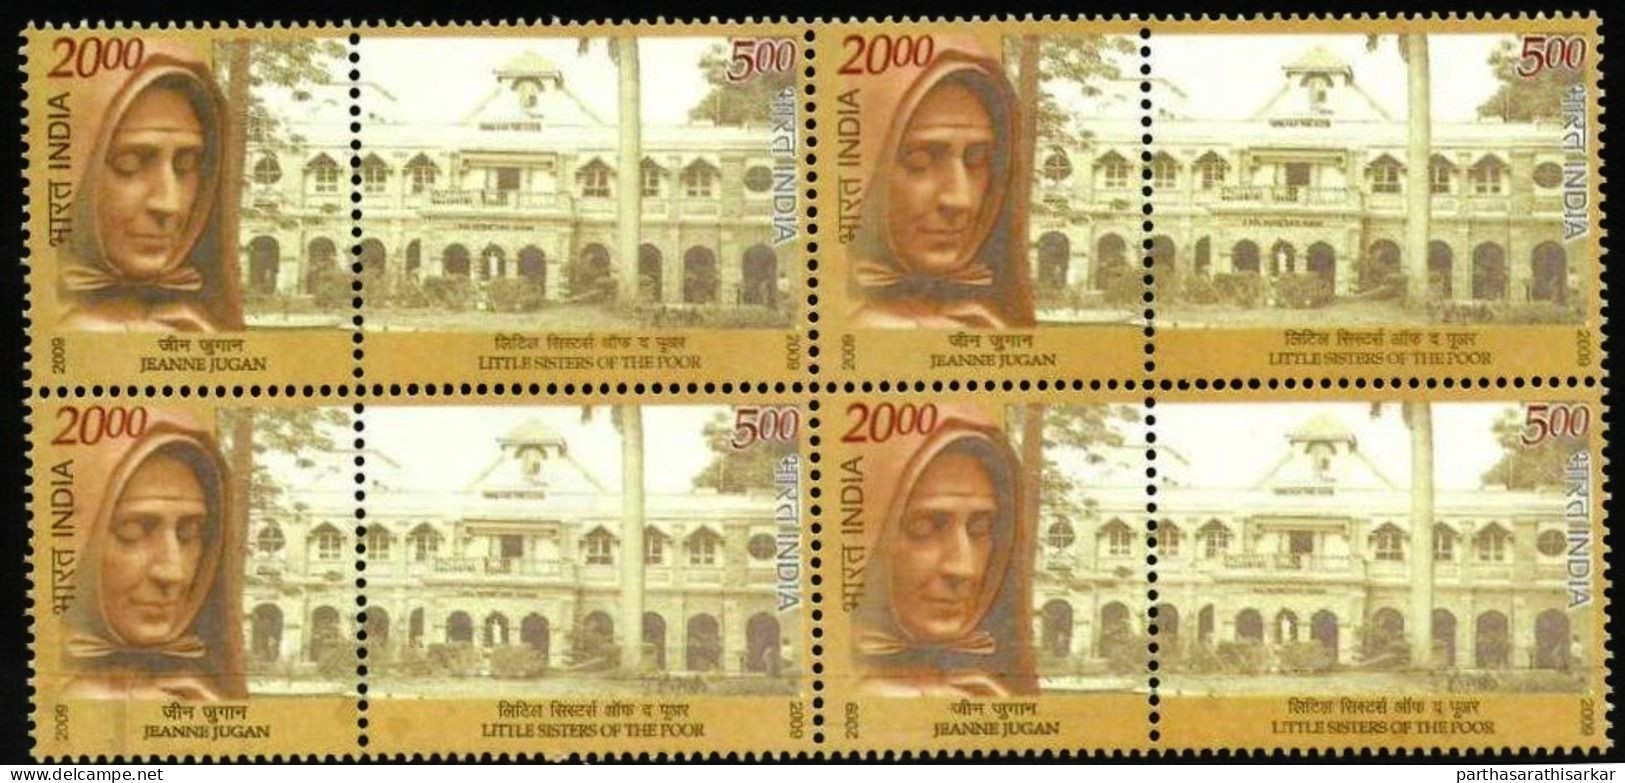 INDIA 2009 LITTLE SISTERS OF POOR COMPLETE SE-TANENT BLOCK OF 4 MNH RARE - Nuovi